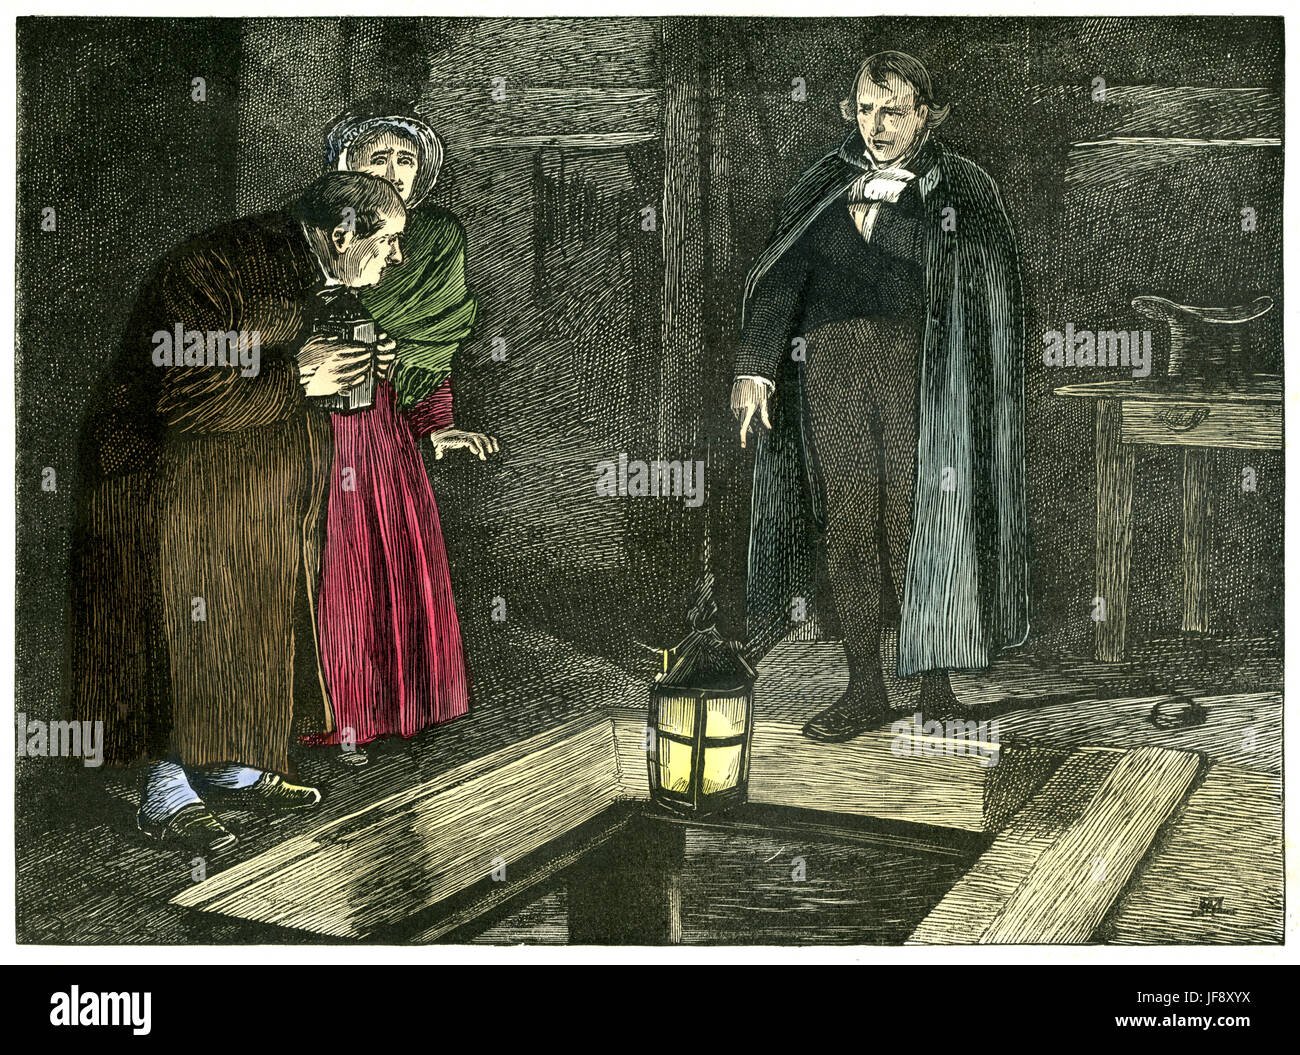 Oliver Twist, novel by Charles Dickens (7 February 1812 – 9 June 1870). Chapter 38: Mr. Bumble watches Mr Monks destroy the evidence of Oliver's family connections. Illustration by Fred Barnard (16 May 1846 – 28 September 1896) Stock Photo